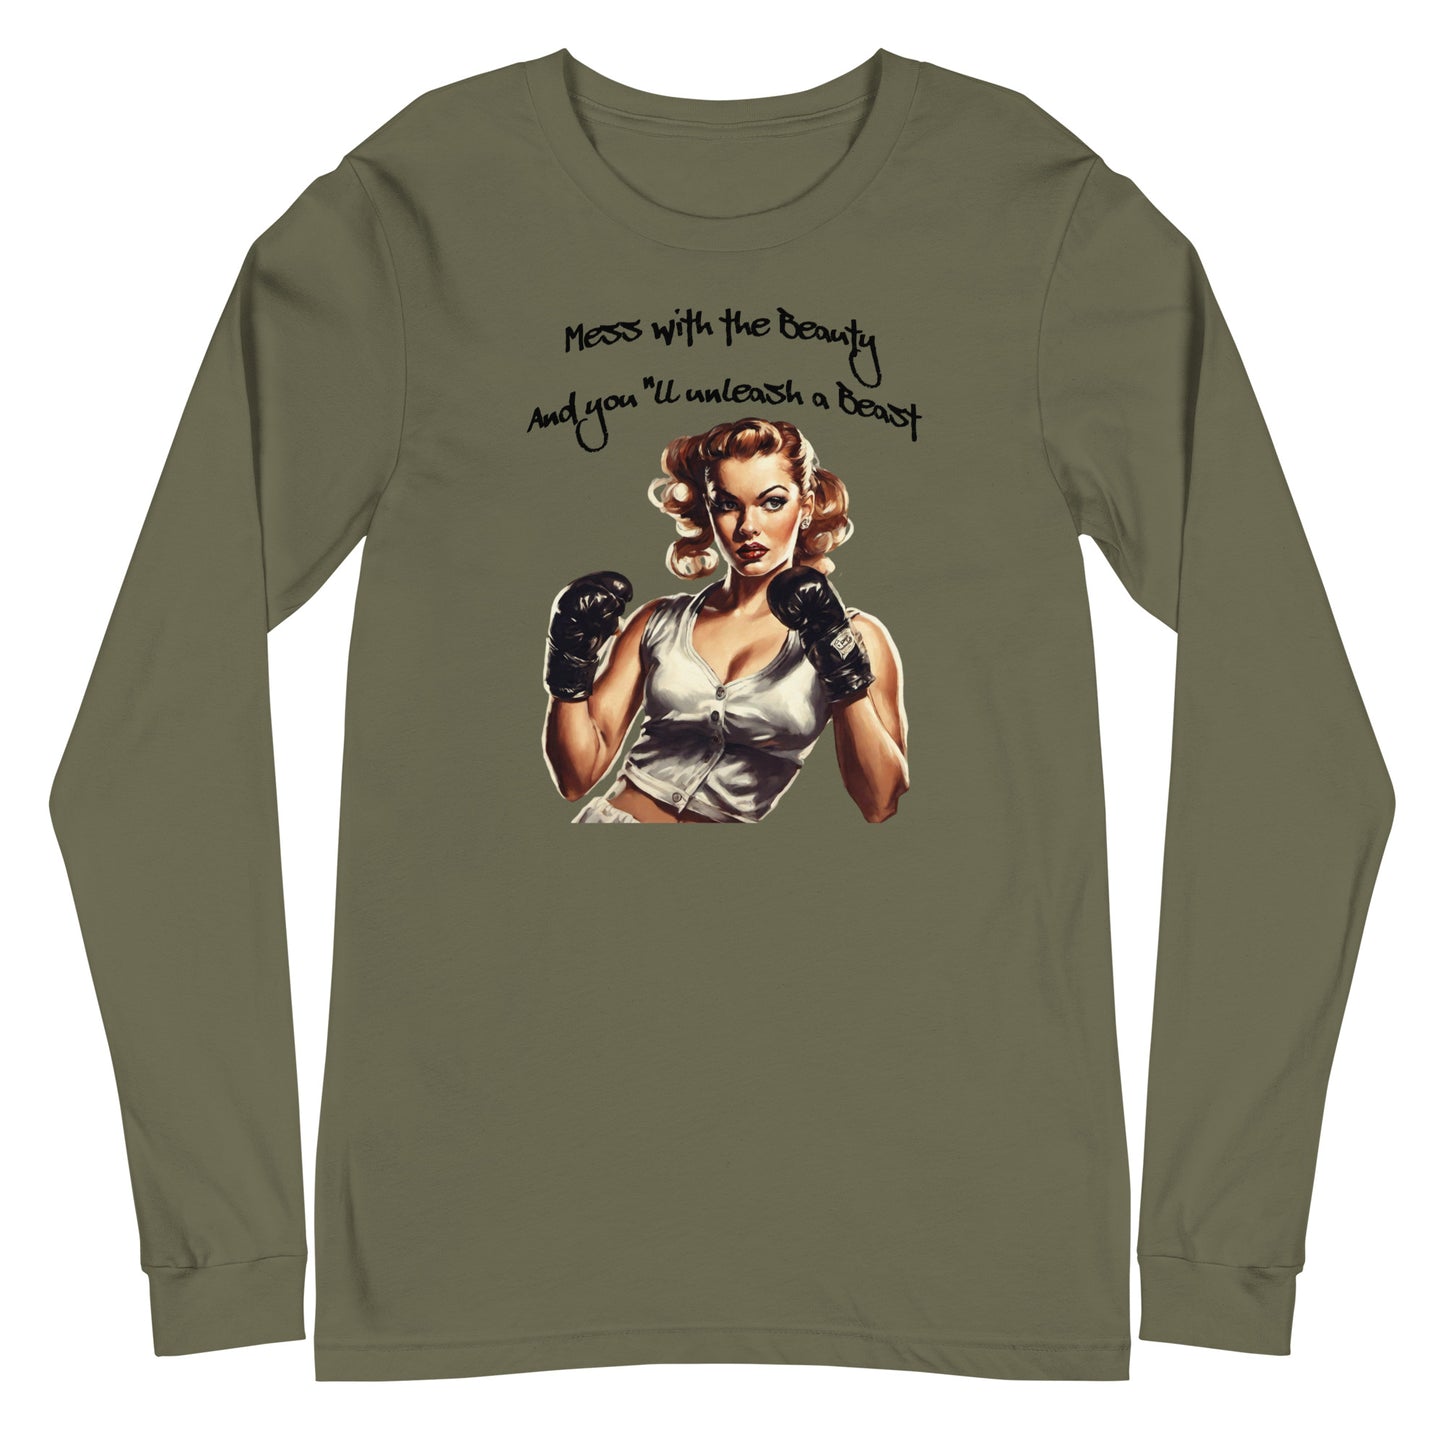 Mess with the Beauty, Unleash the Beast Women's Long Sleeve Tee Military Green